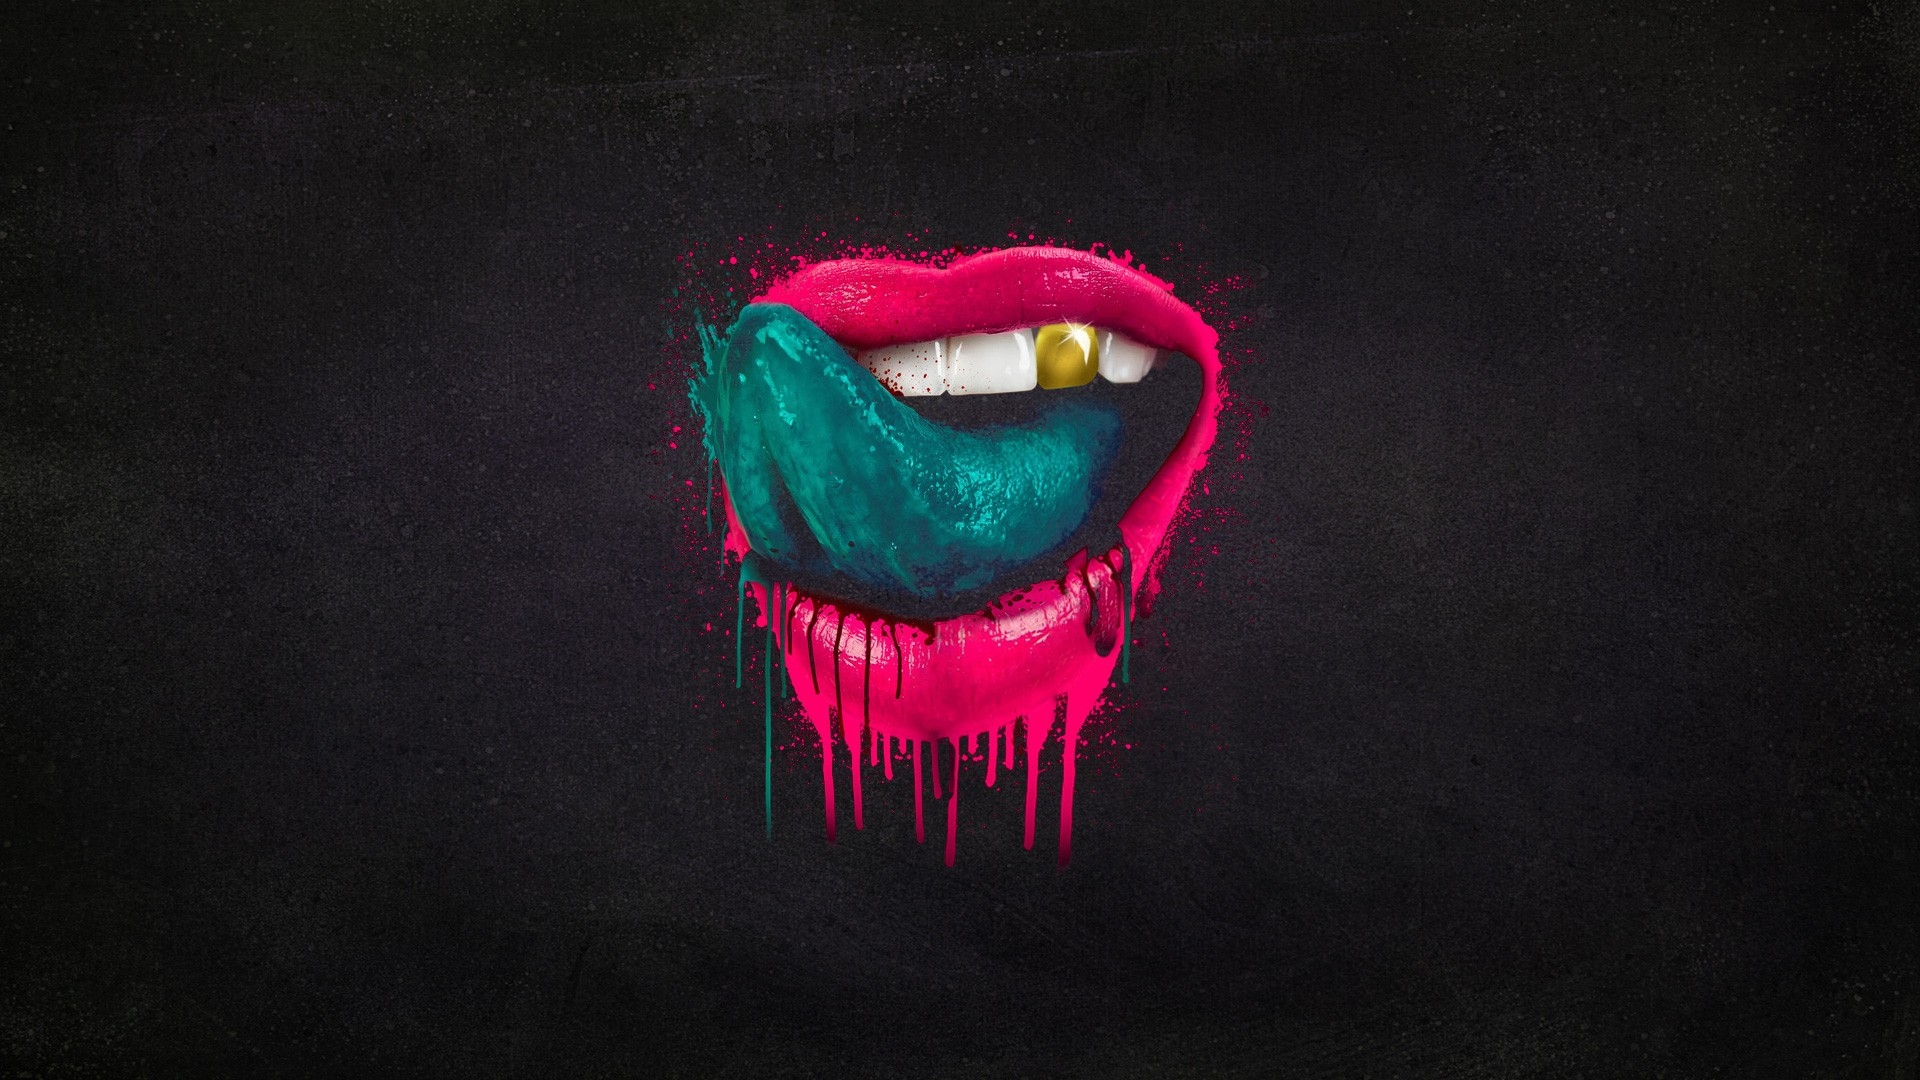 1920x1080 Red lips and green tongue MacBook Air Wallpaper Download